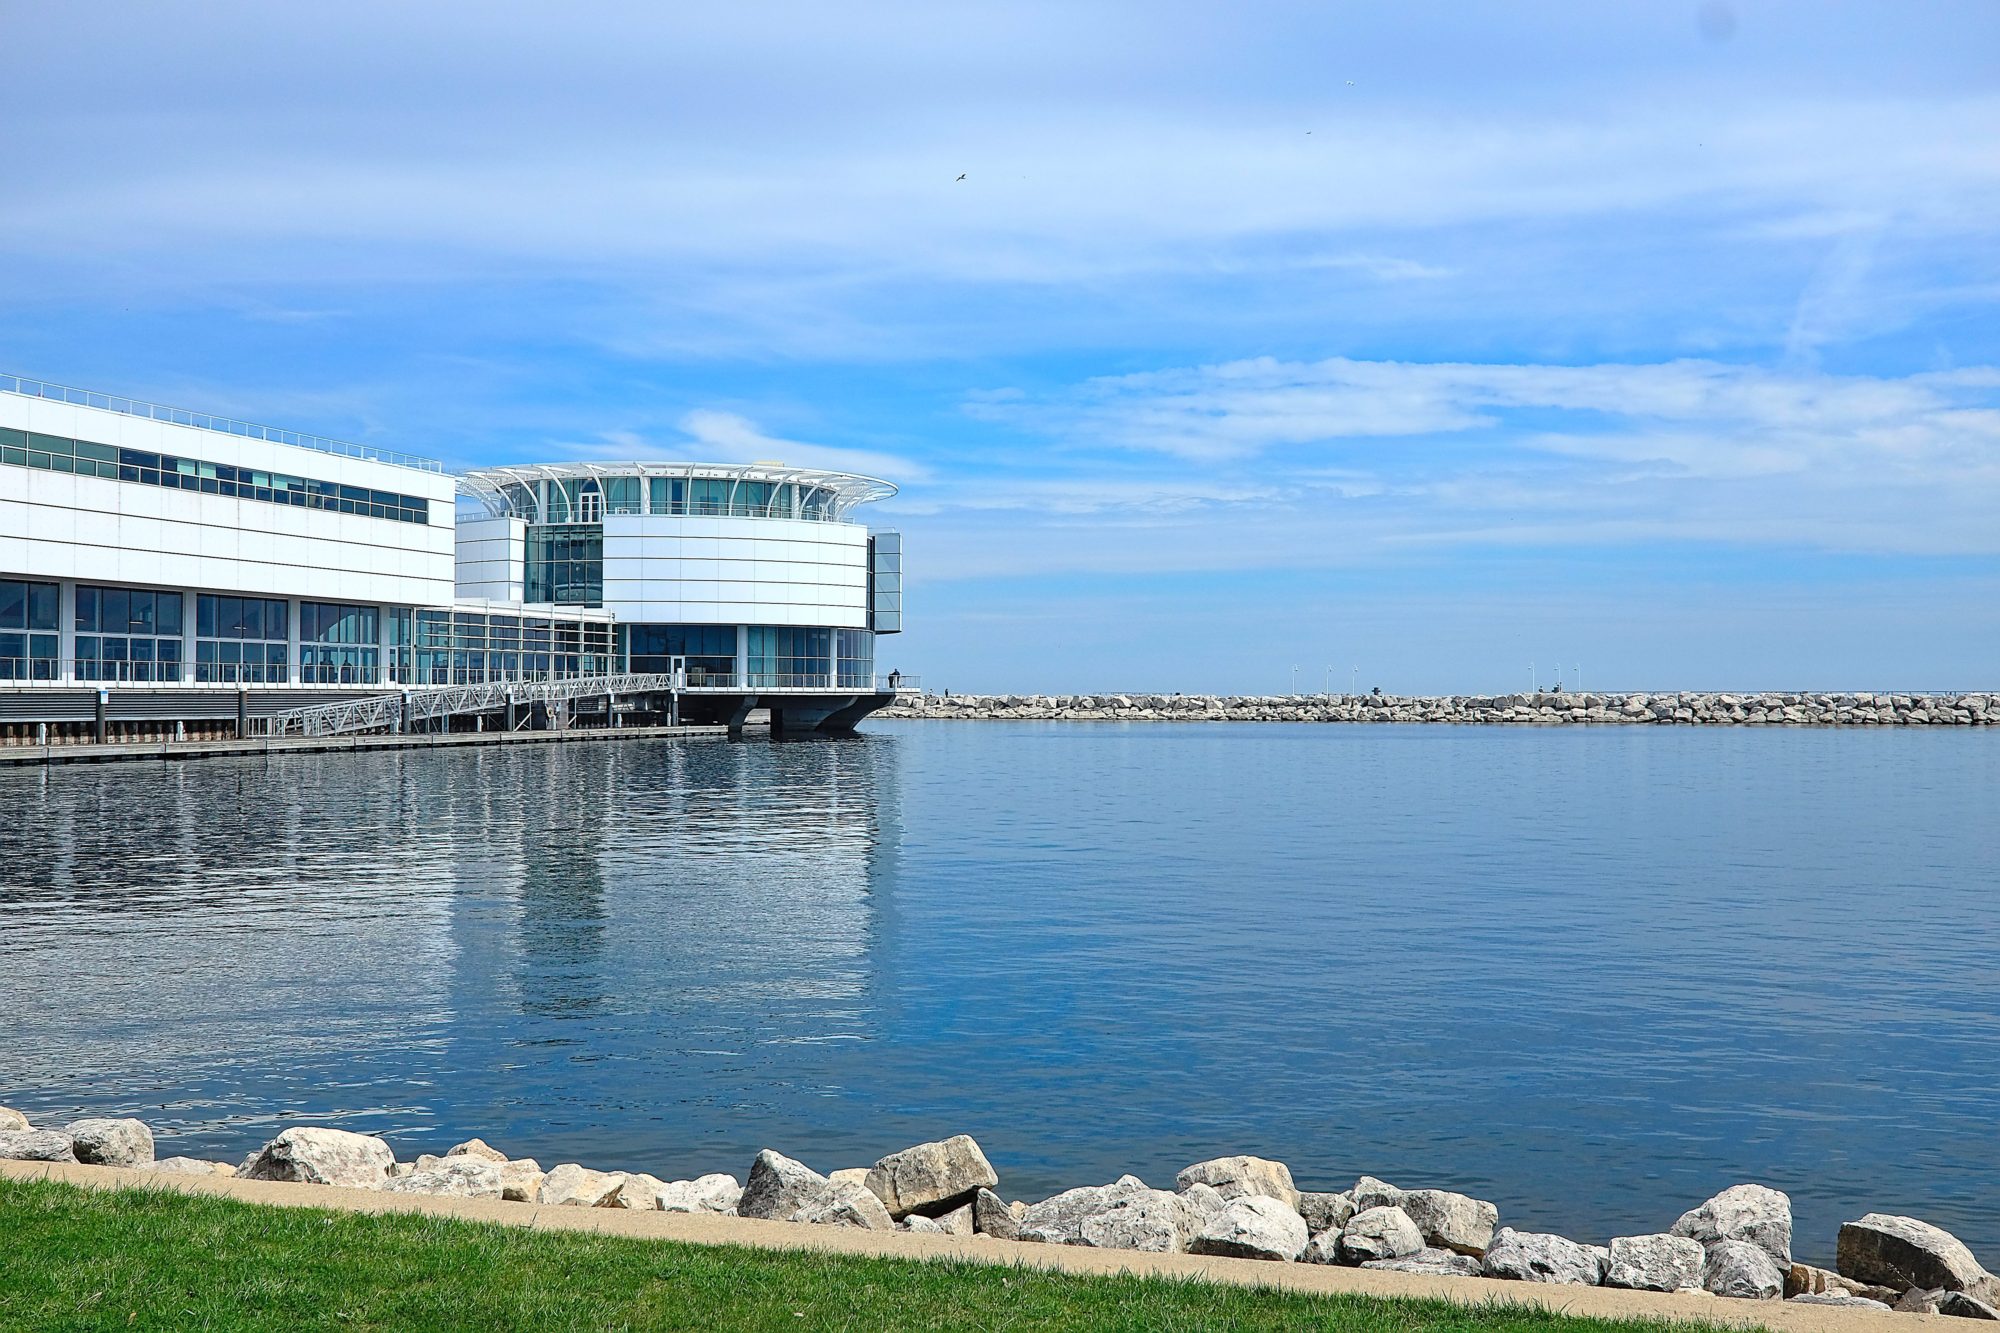 A portion of Discovery World is seen on Lake Michigan